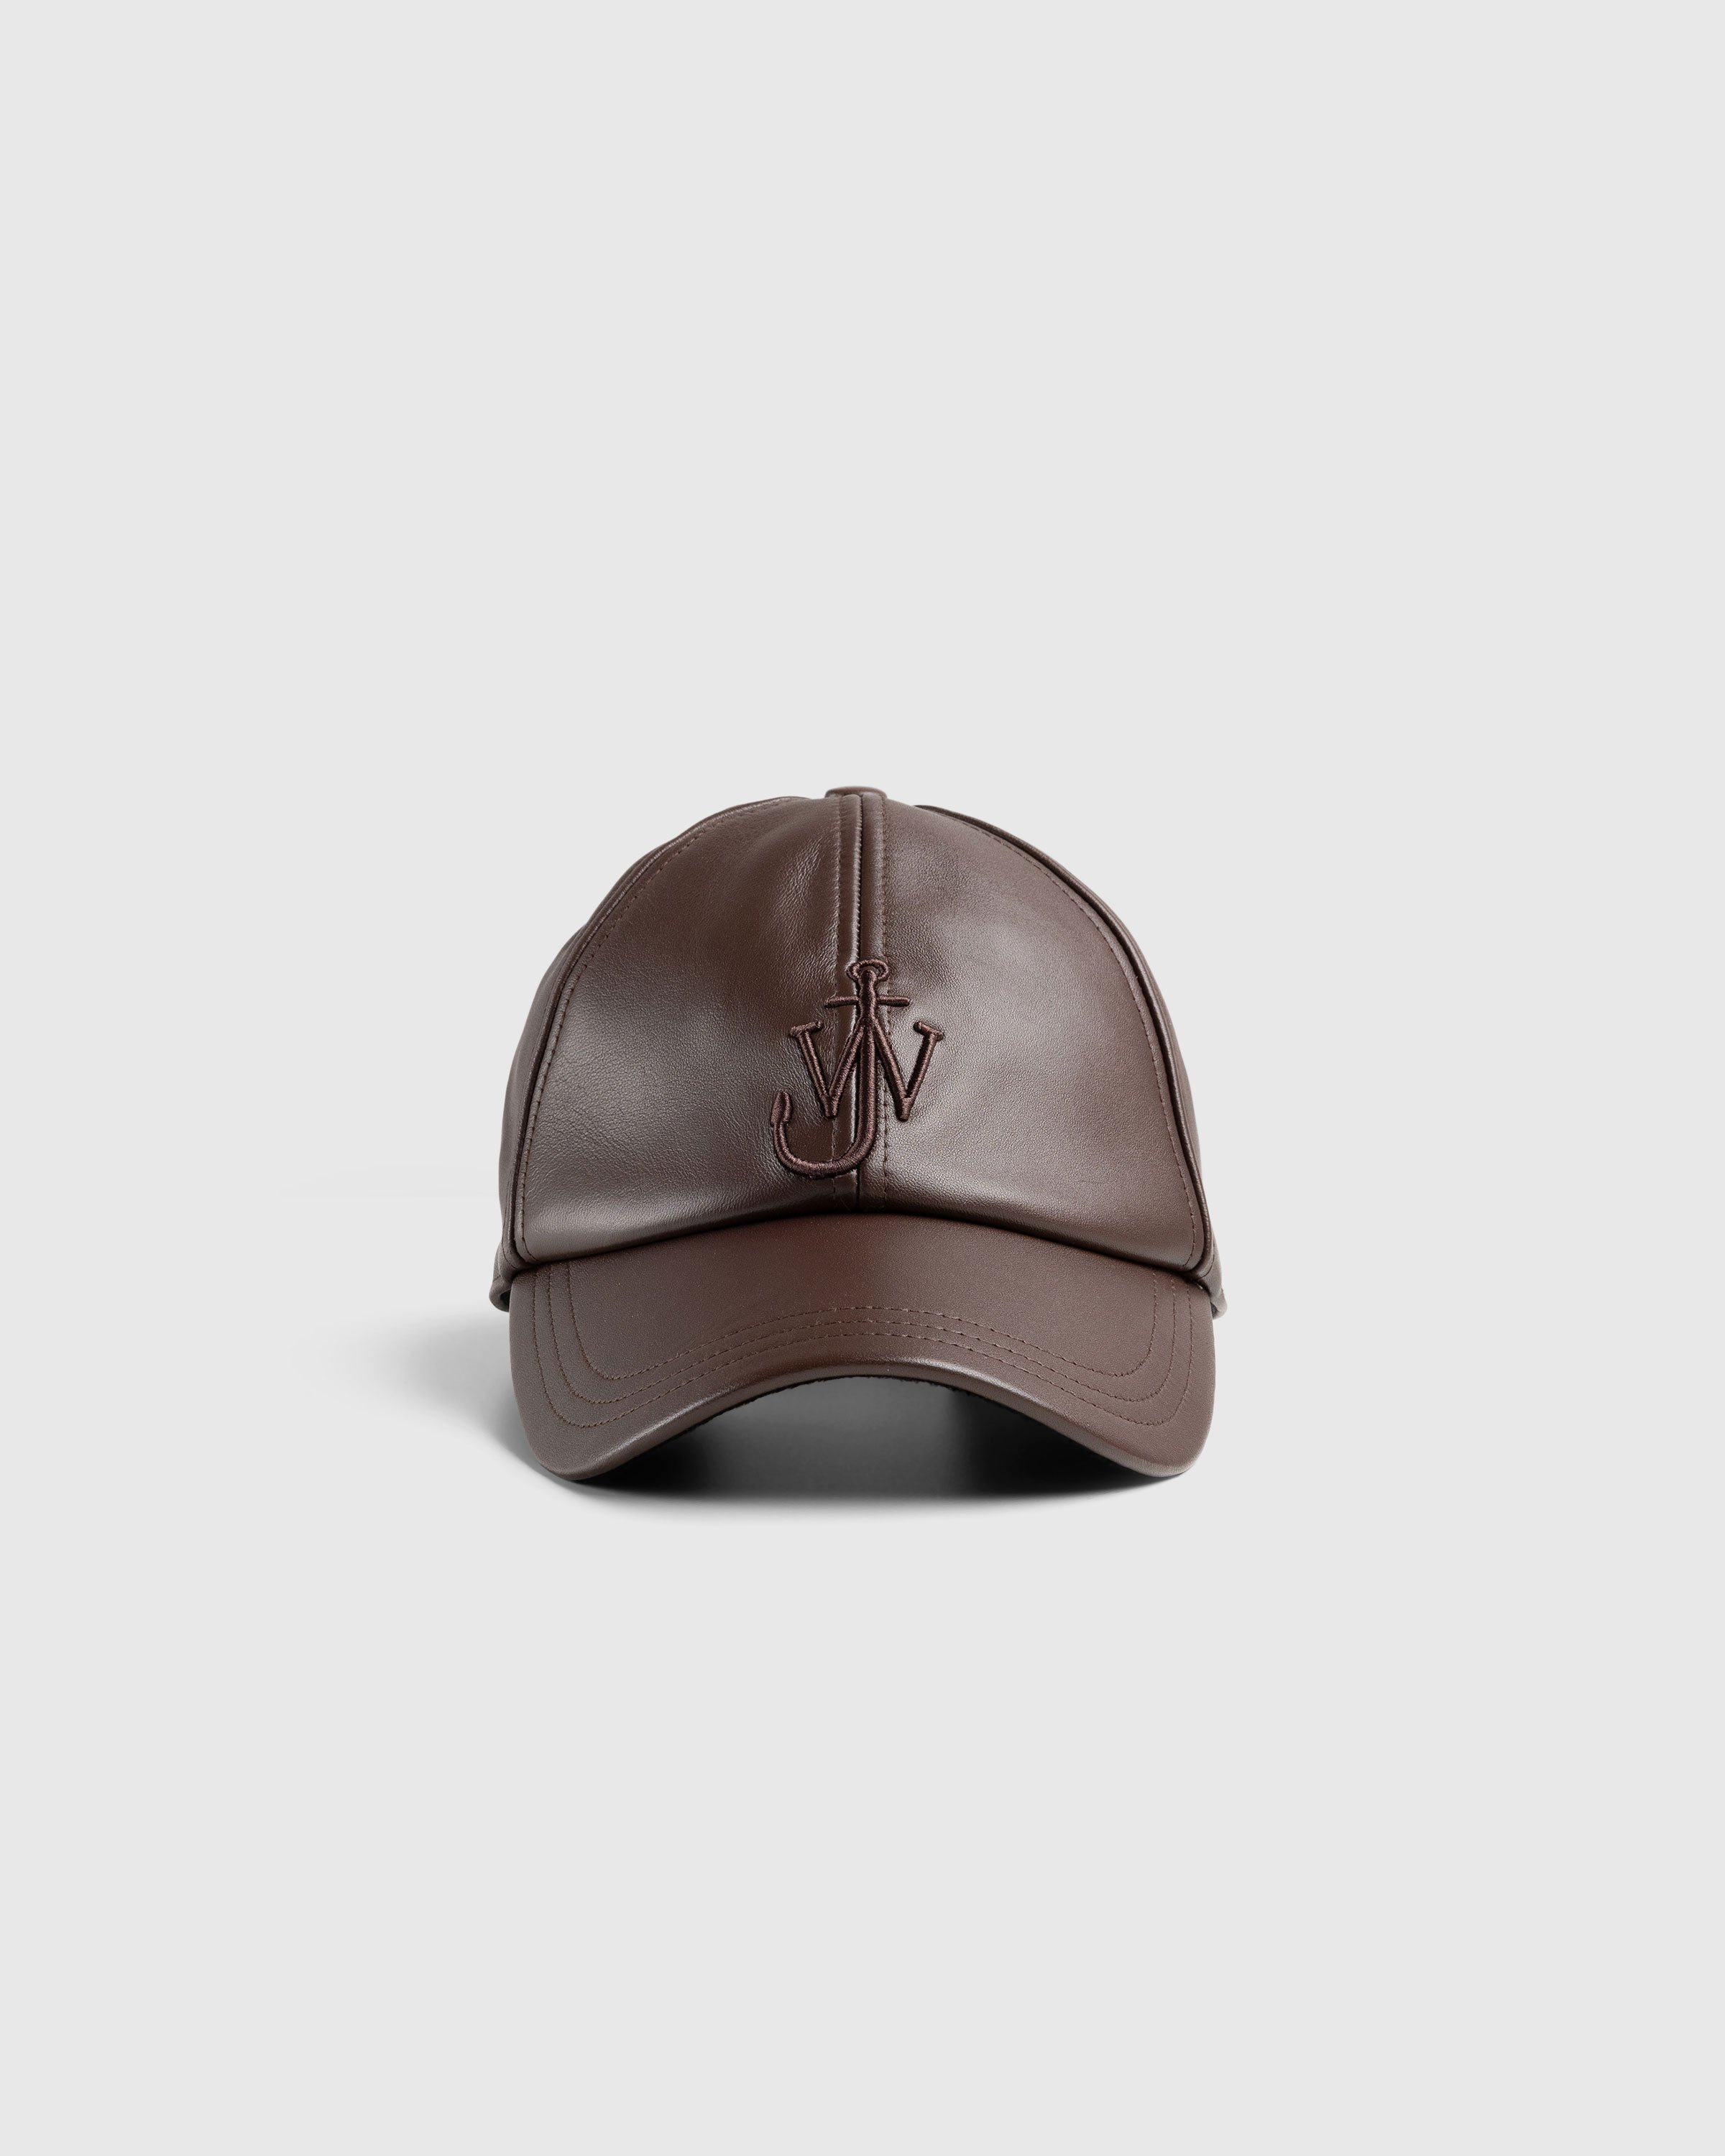 J.W. Anderson - Leather Baseball Cap Brown - Accessories - Brown - Image 2